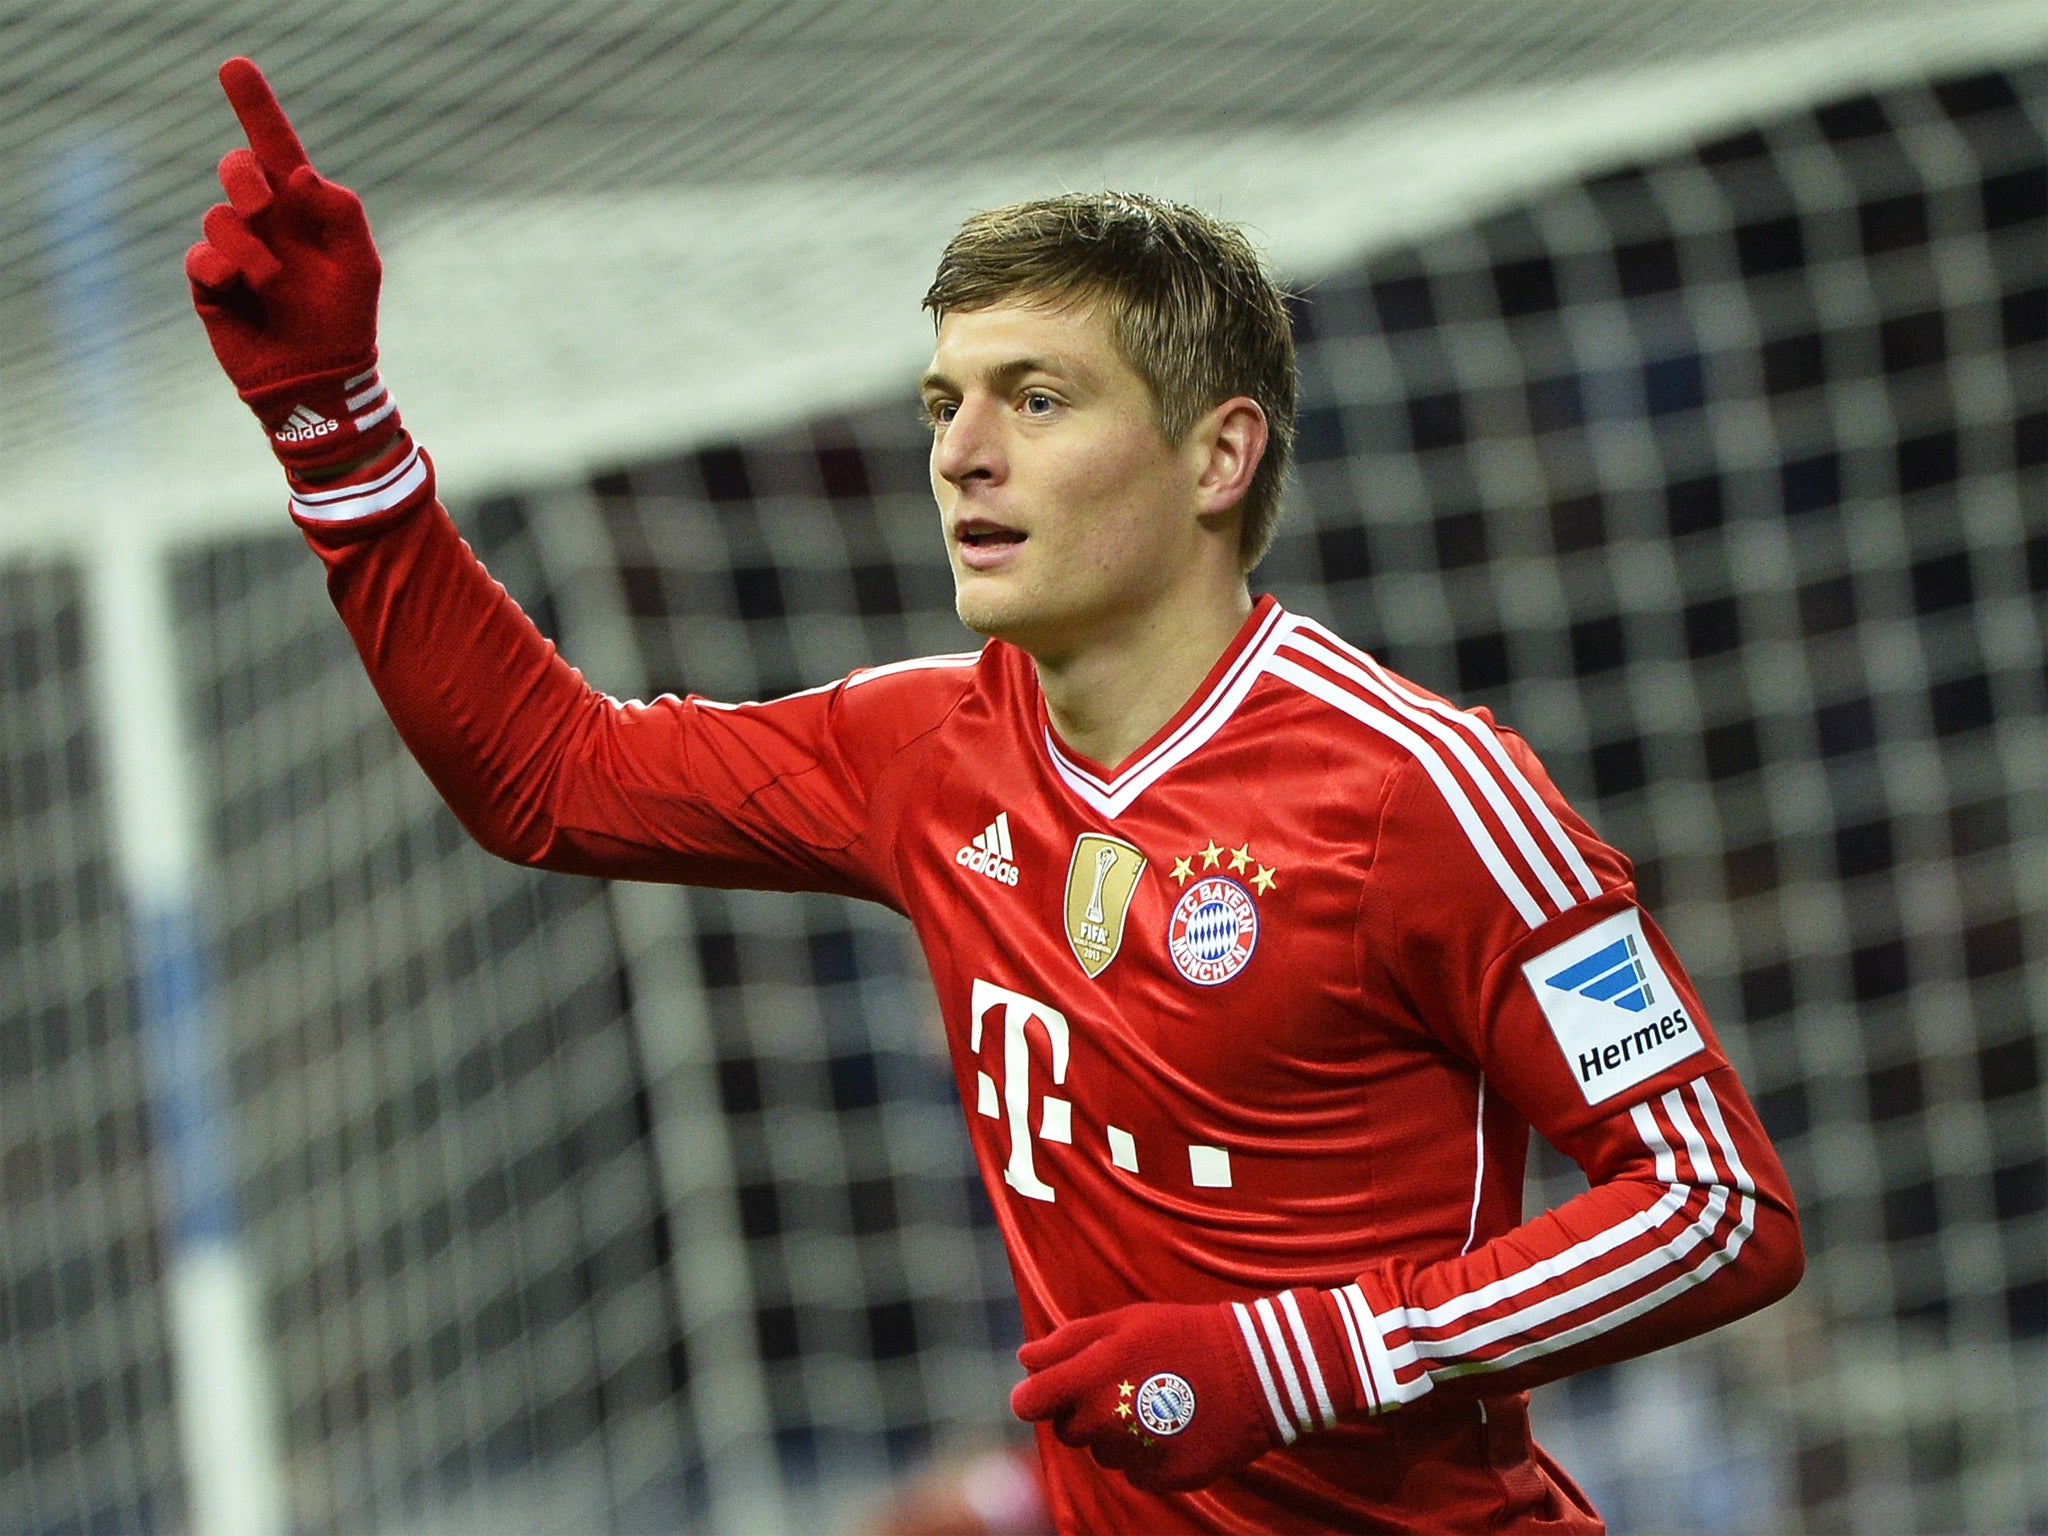 Transfer news: Toni Kroos's agent claims Manchester United have not a bid and midfielder will stay Bayern Munich until 'at least' 2015 The Independent | The Independent